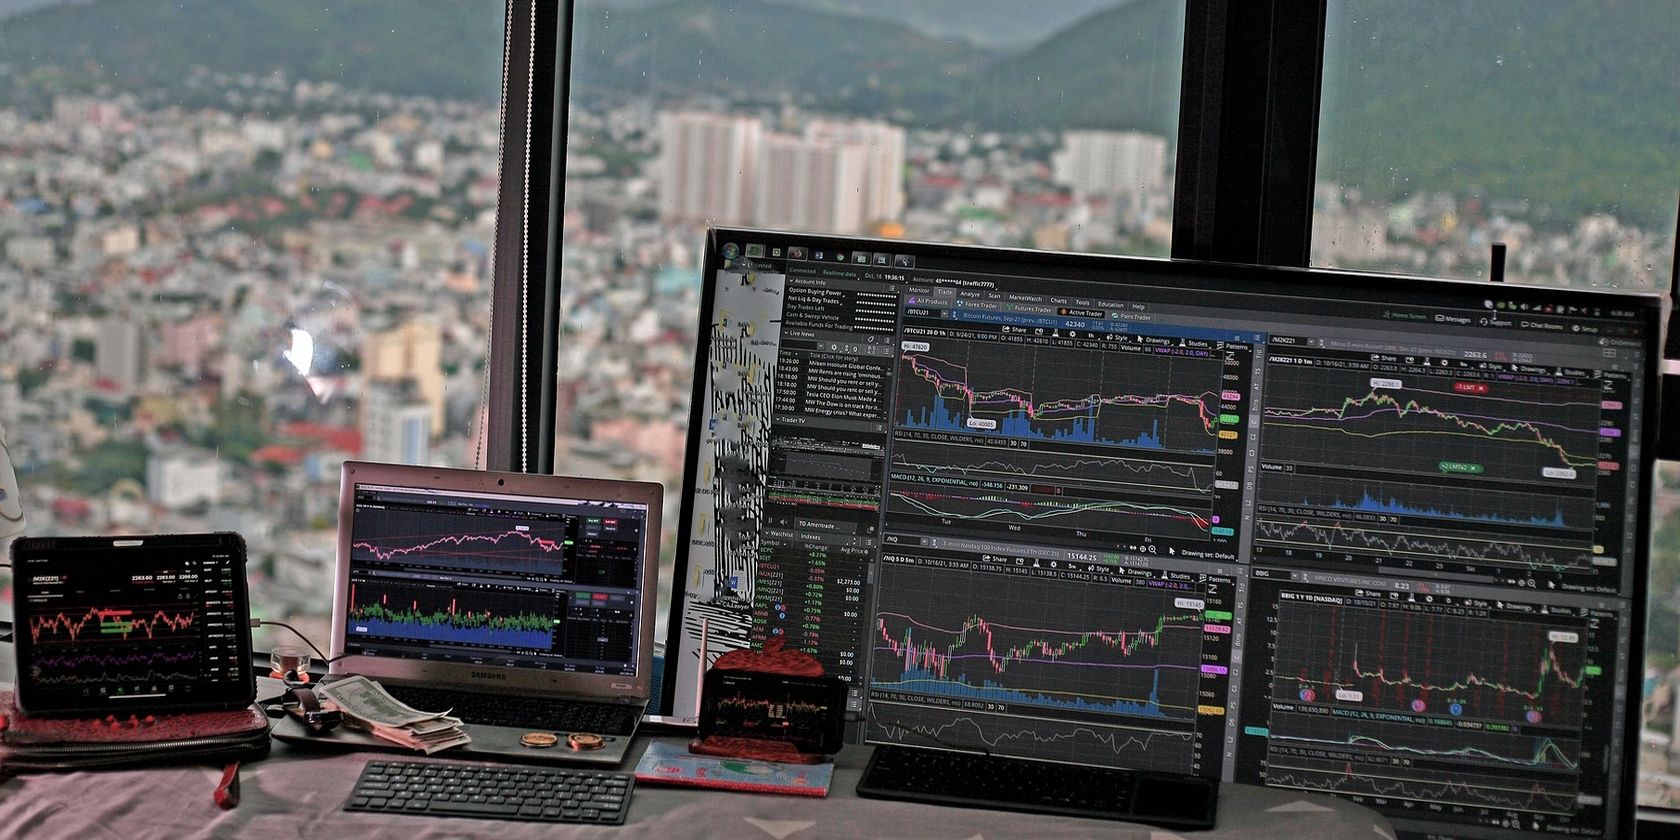 screens containing price charts and indicators